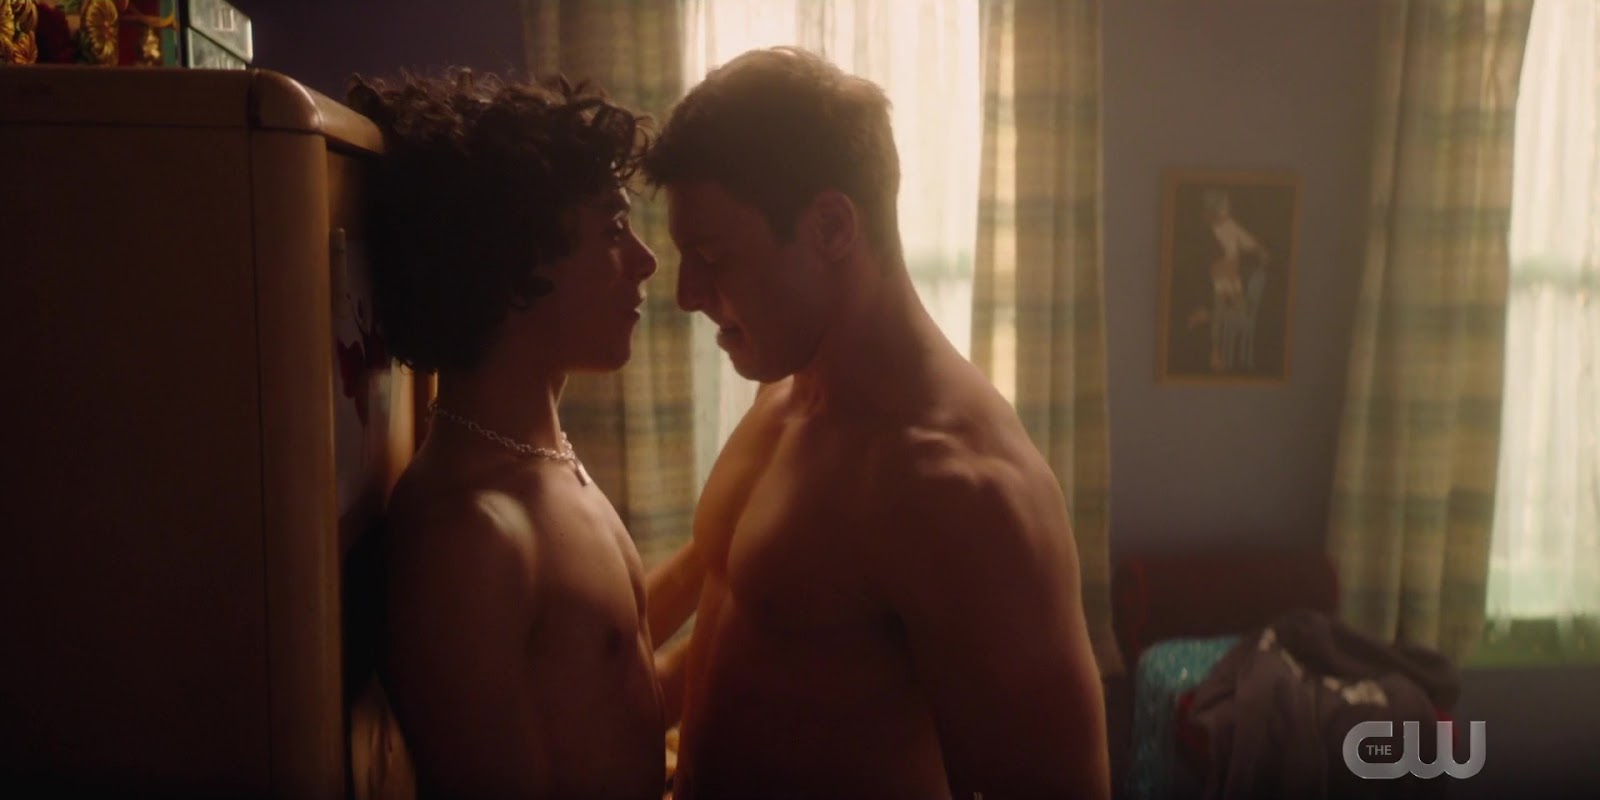 Omg, These Are The Top Ten Best Netflix Shows For Male Nudity